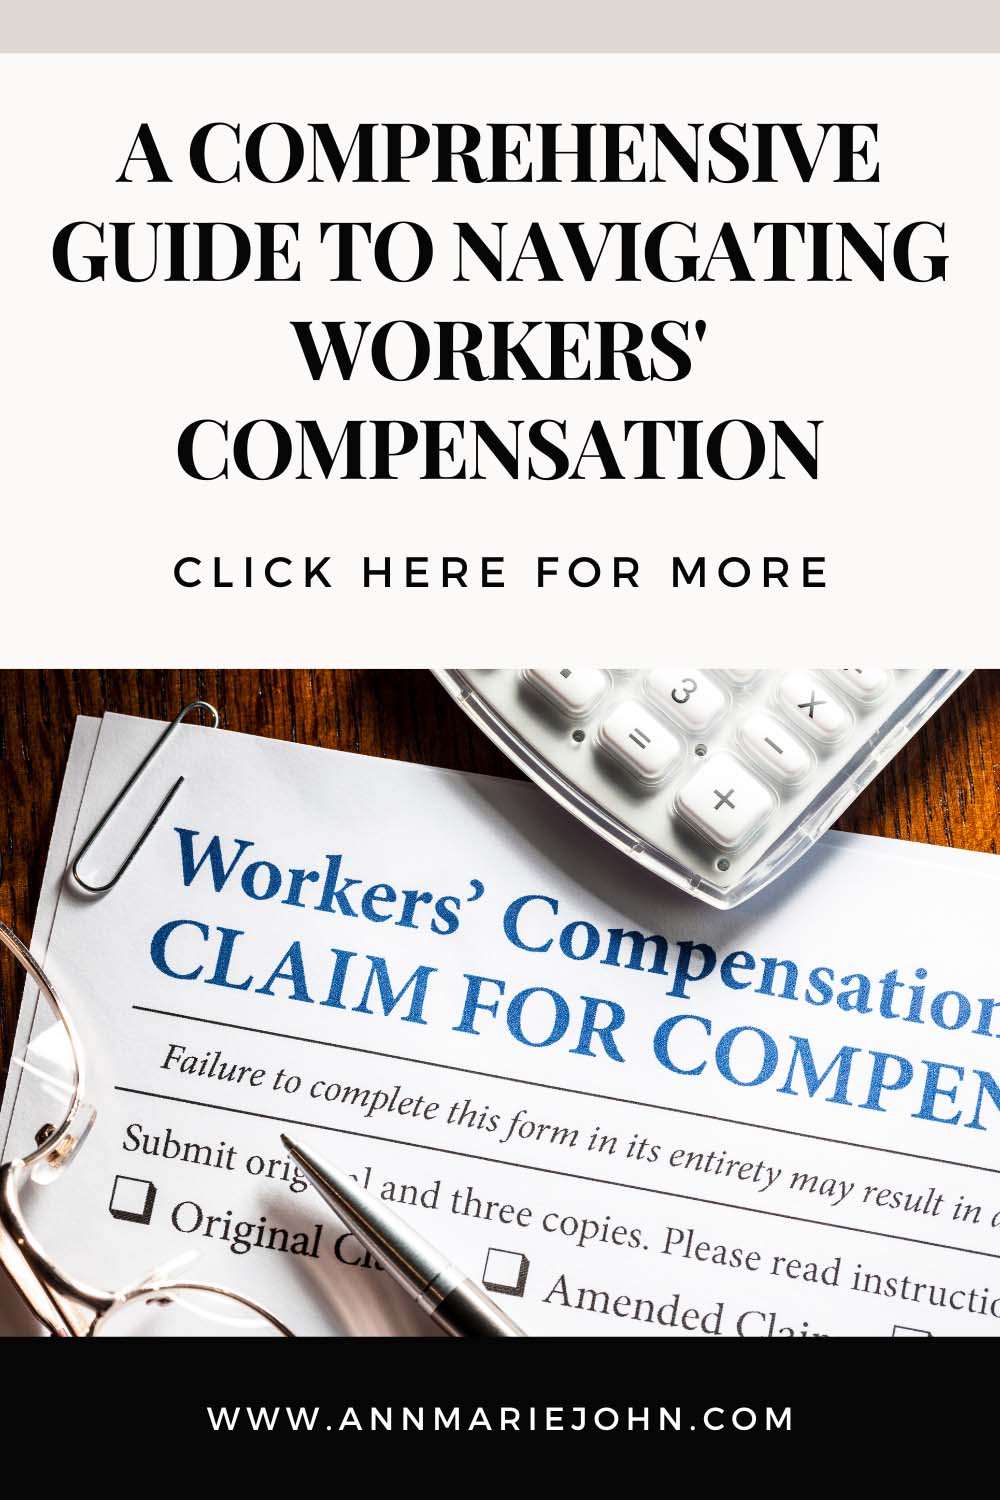 A Comprehensive Guide to Navigating Workers' Compensation